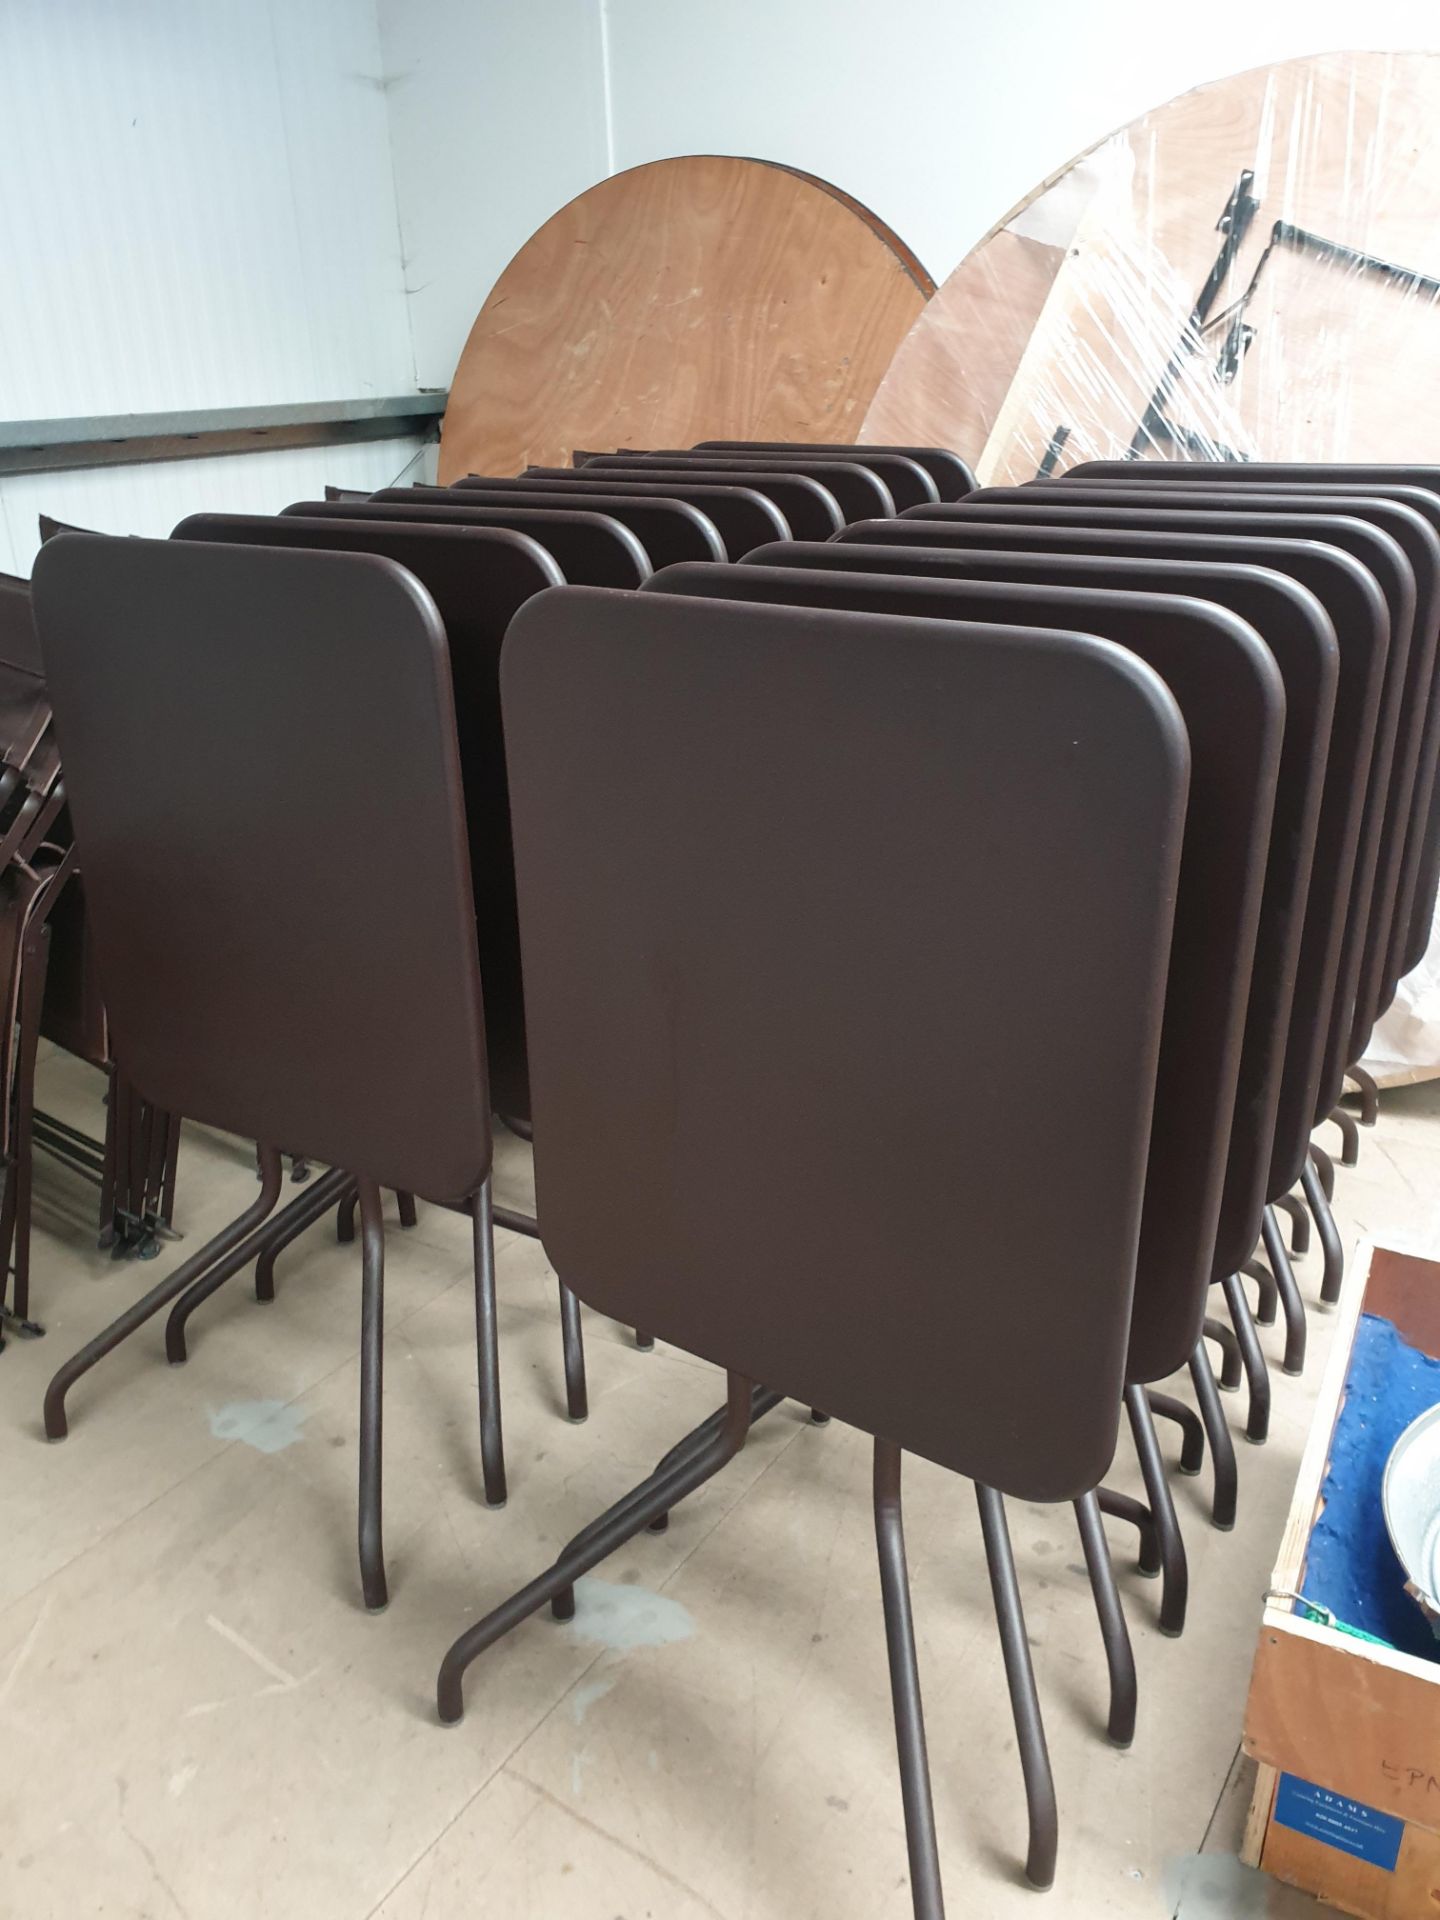 * 2x Fermob Brown Tables and 4x Fermob Brown Chairs